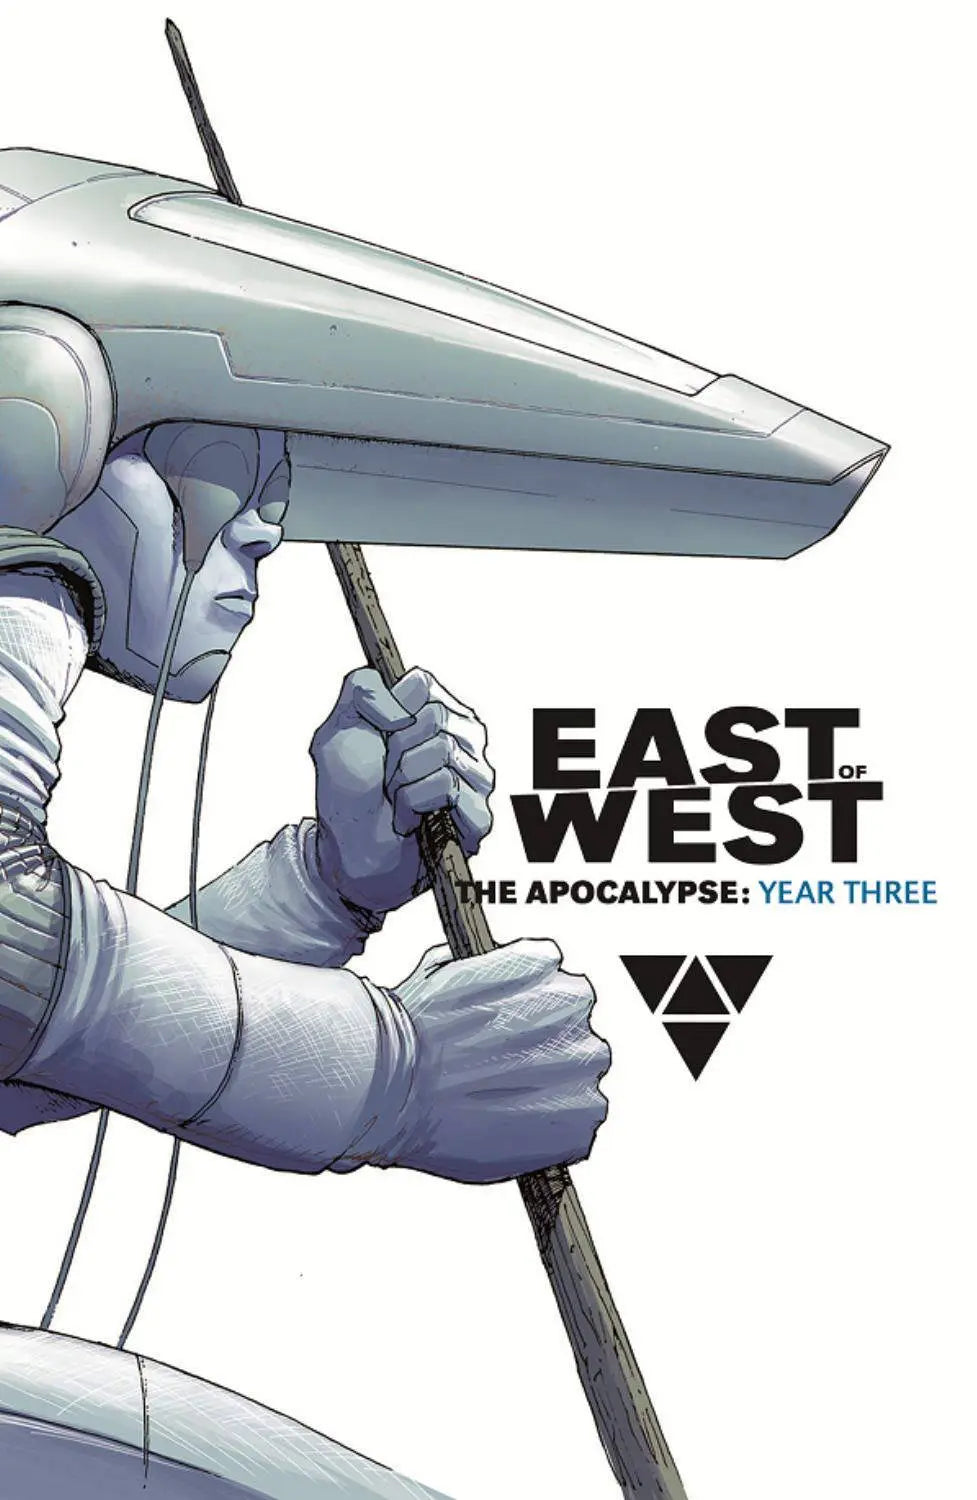 East of West: The Apocalypse, Year Three Hardcover - Nov. 24 2020 King Gaming